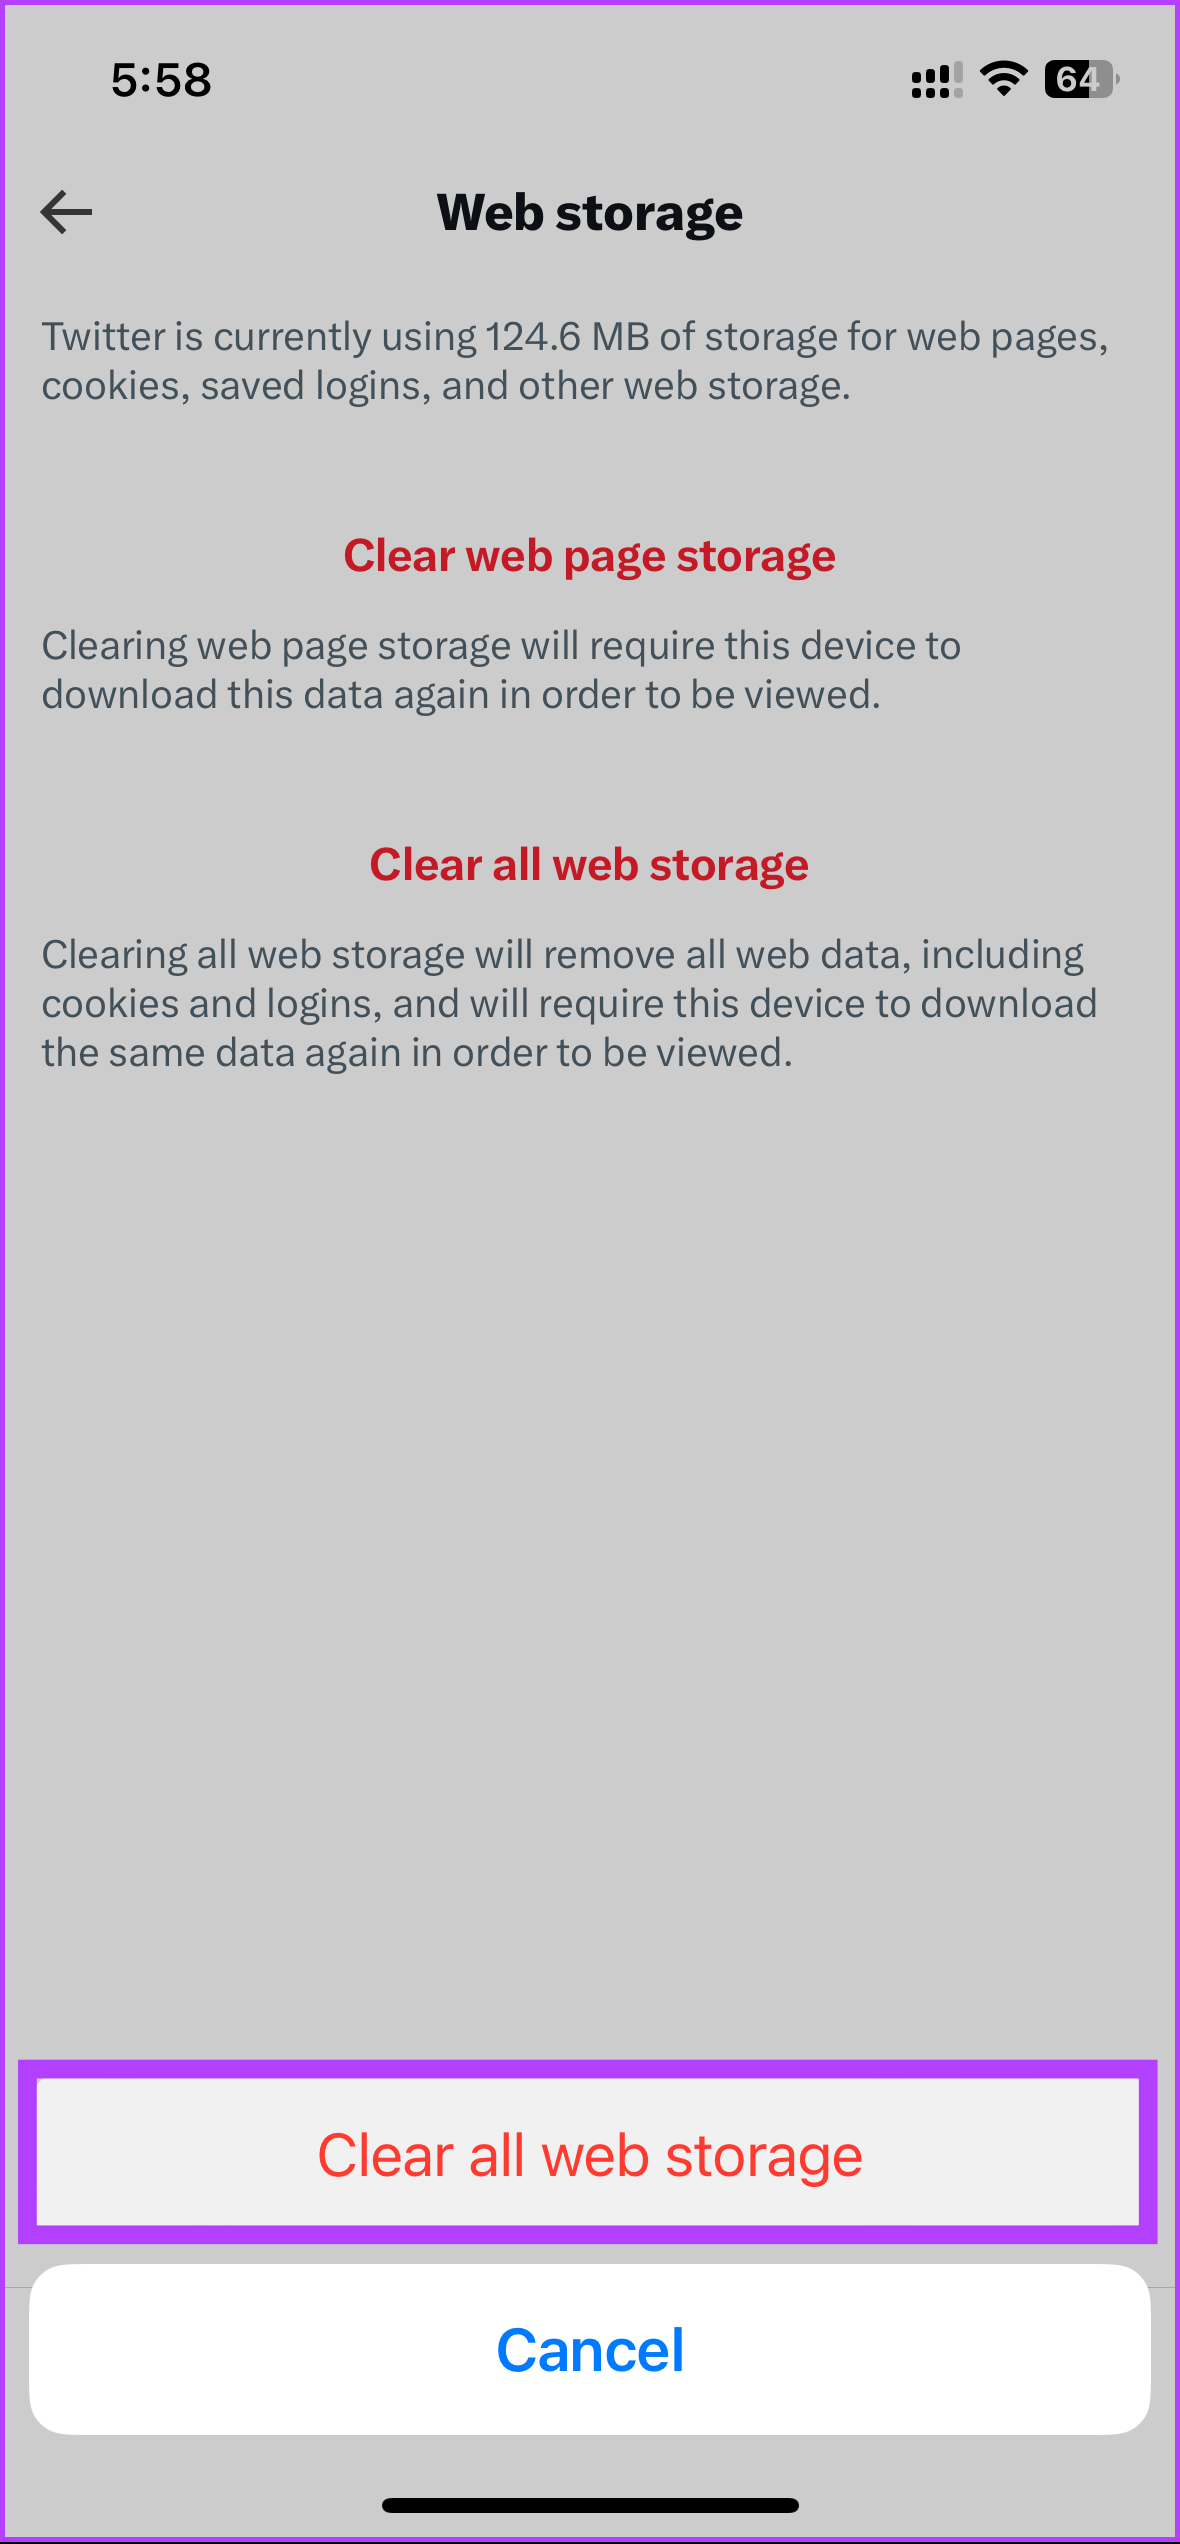 select 'Clear all web storage'